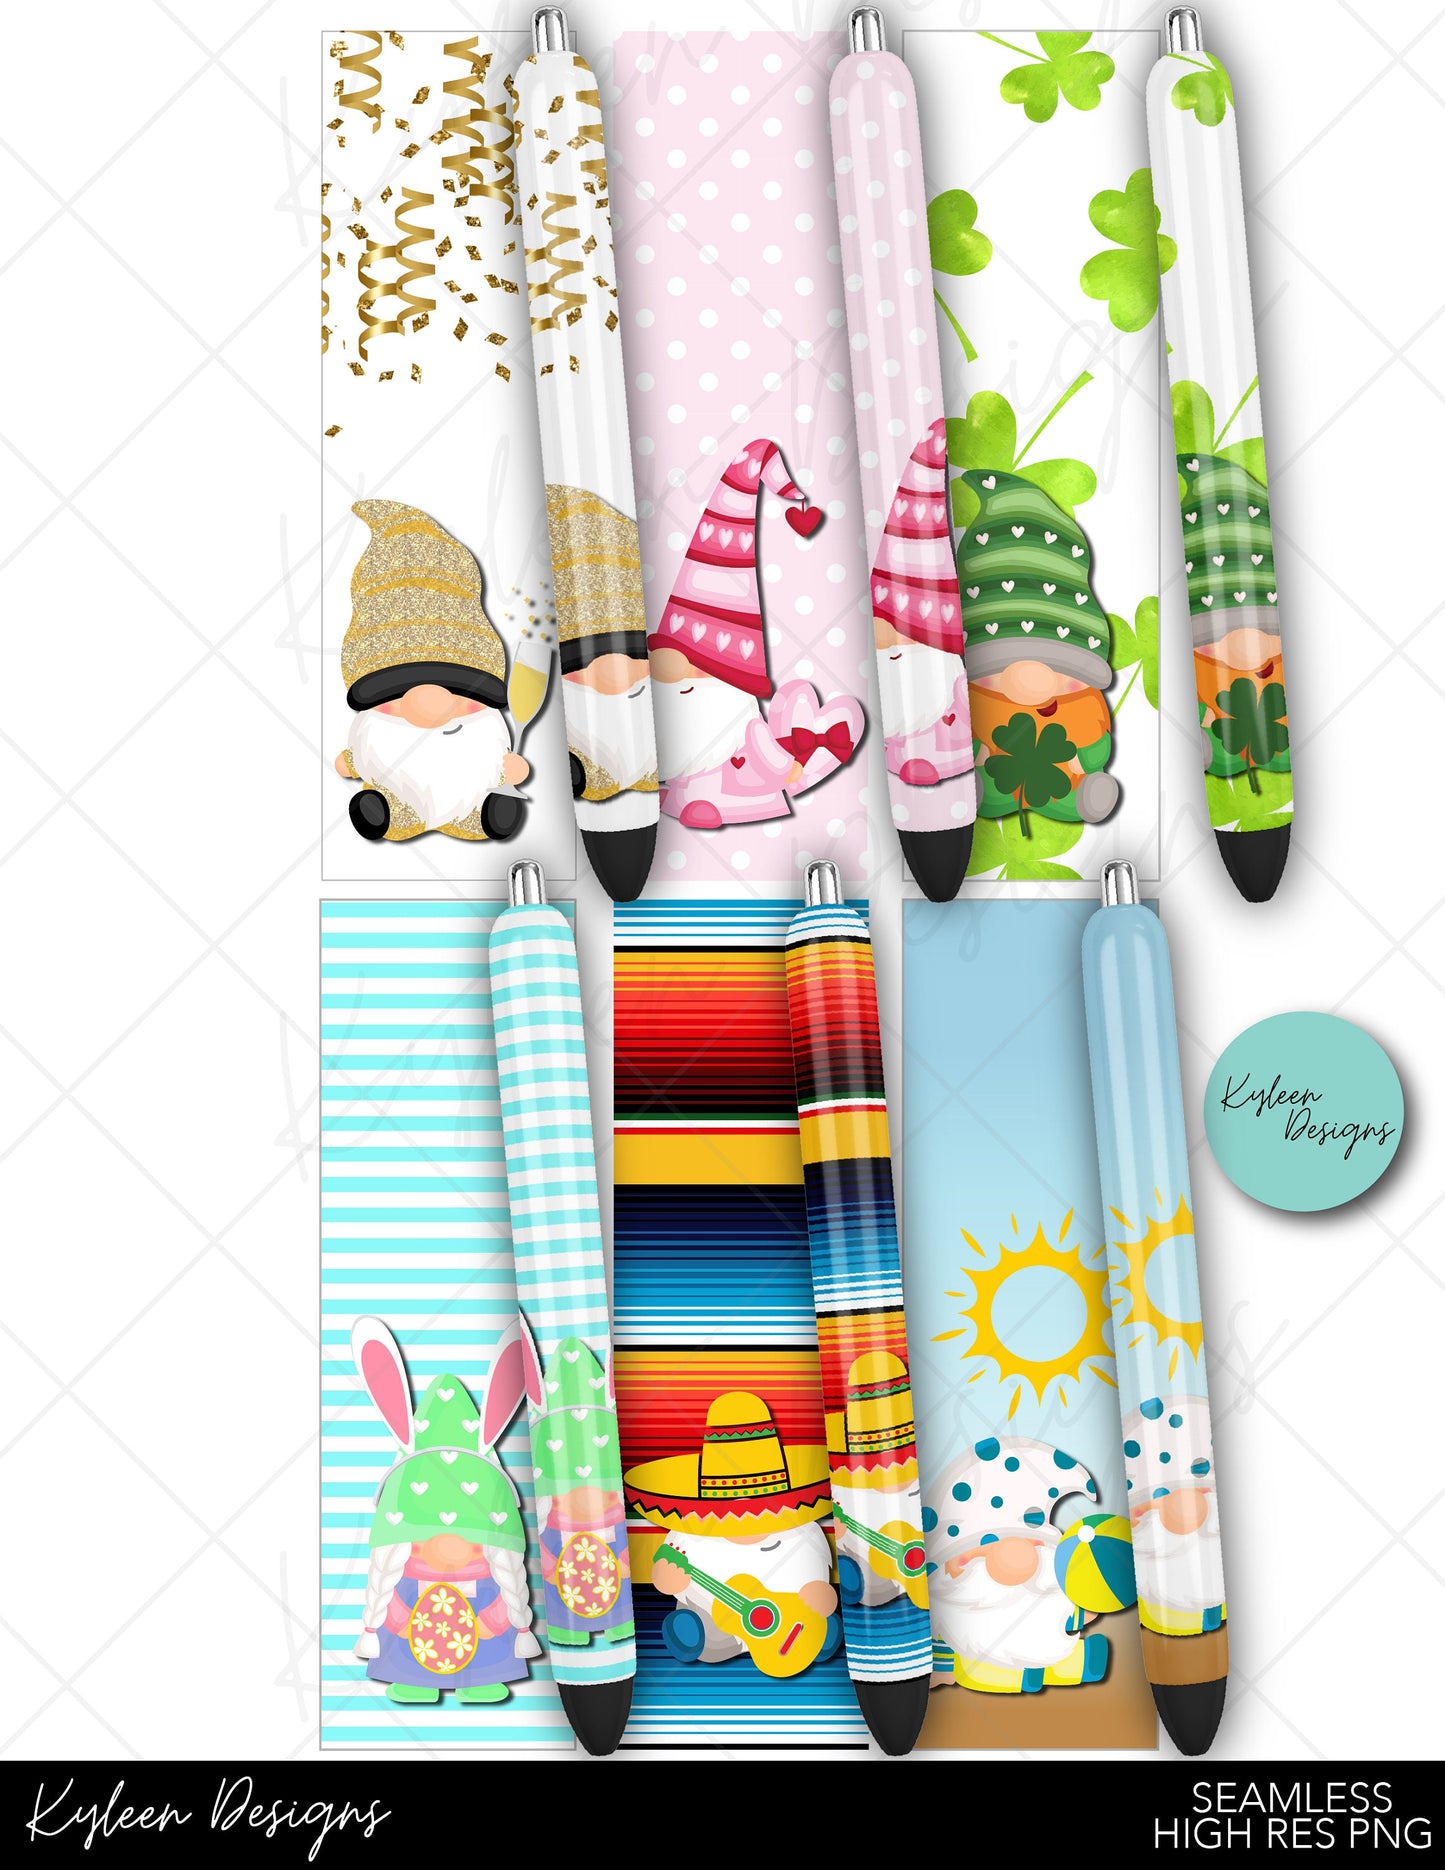 SEAMLESS monthly gnome pen wraps for waterslide high RES PNG